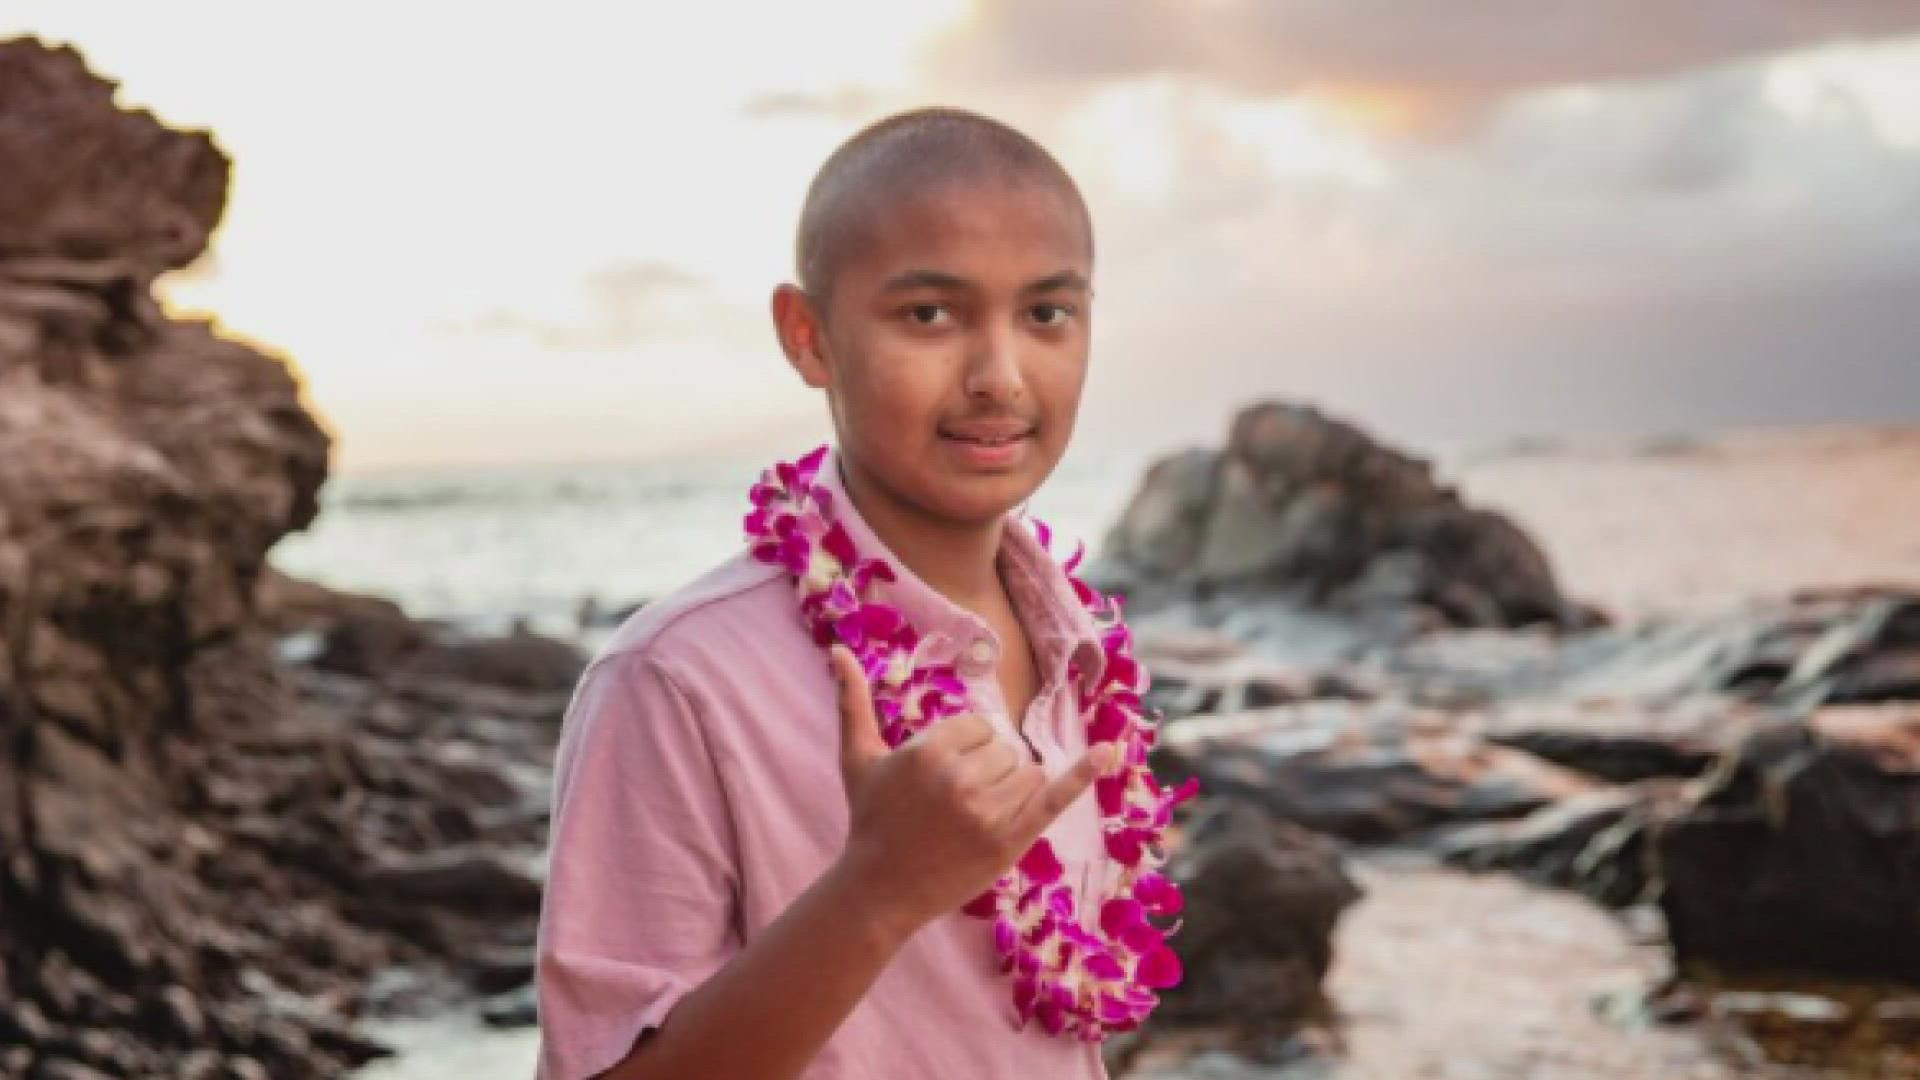 Zander Wainhouse was supposed to be on his Make-A-Wish trip to Hawaii, but his health took a turn before the visit.